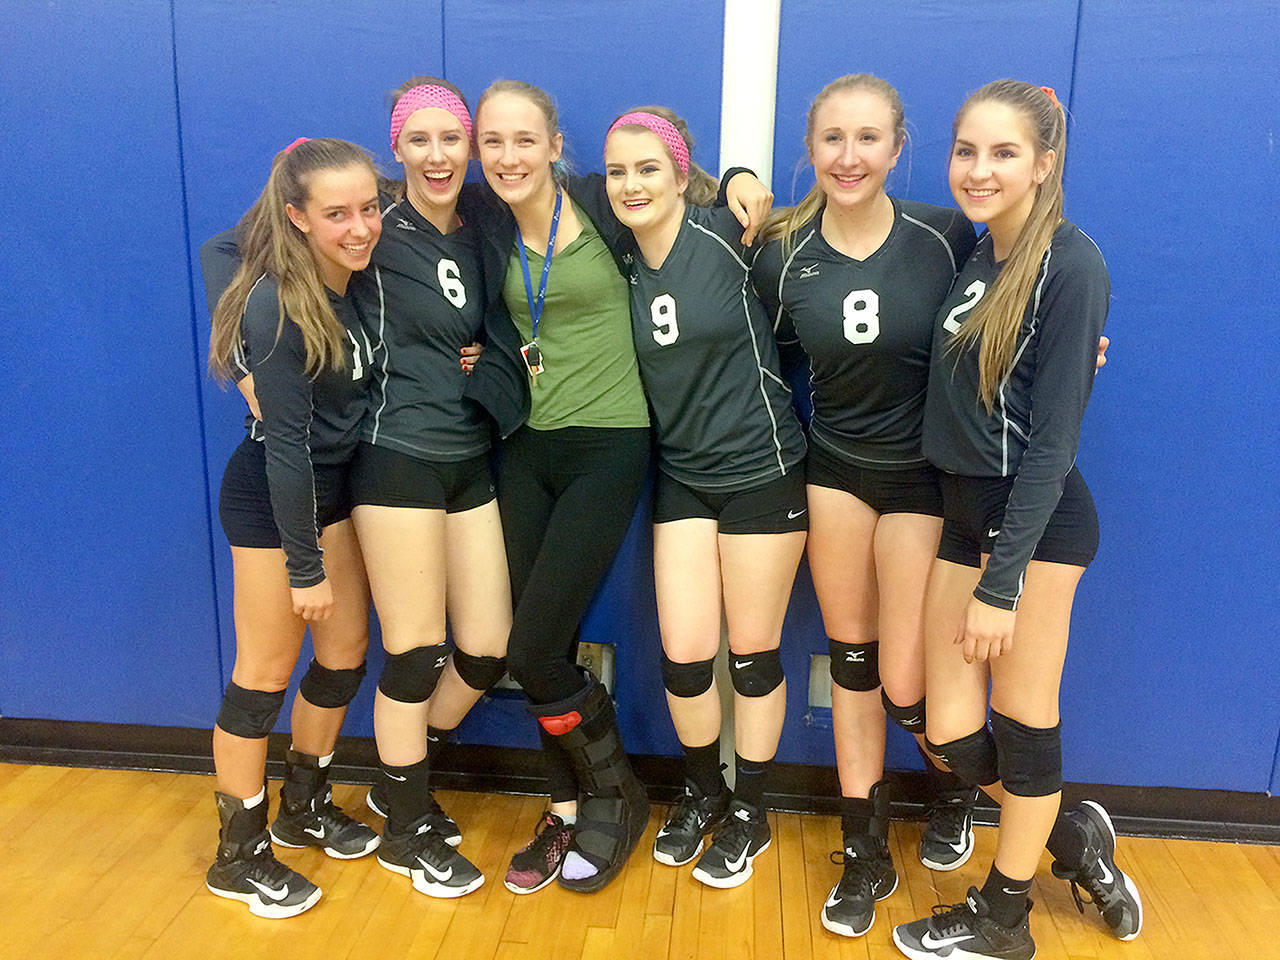 Evan Thompson / The Record — South Whidbey volleyball’s senior class pose for a photo following the Falcons’ 3-0 victory over Cedarcrest on Monday night. From left to right: Sophia Nielsen, Courtney Todd, Megan Miller, Bailey Todd, Kolby Heggenes and Rebekah Merrow.